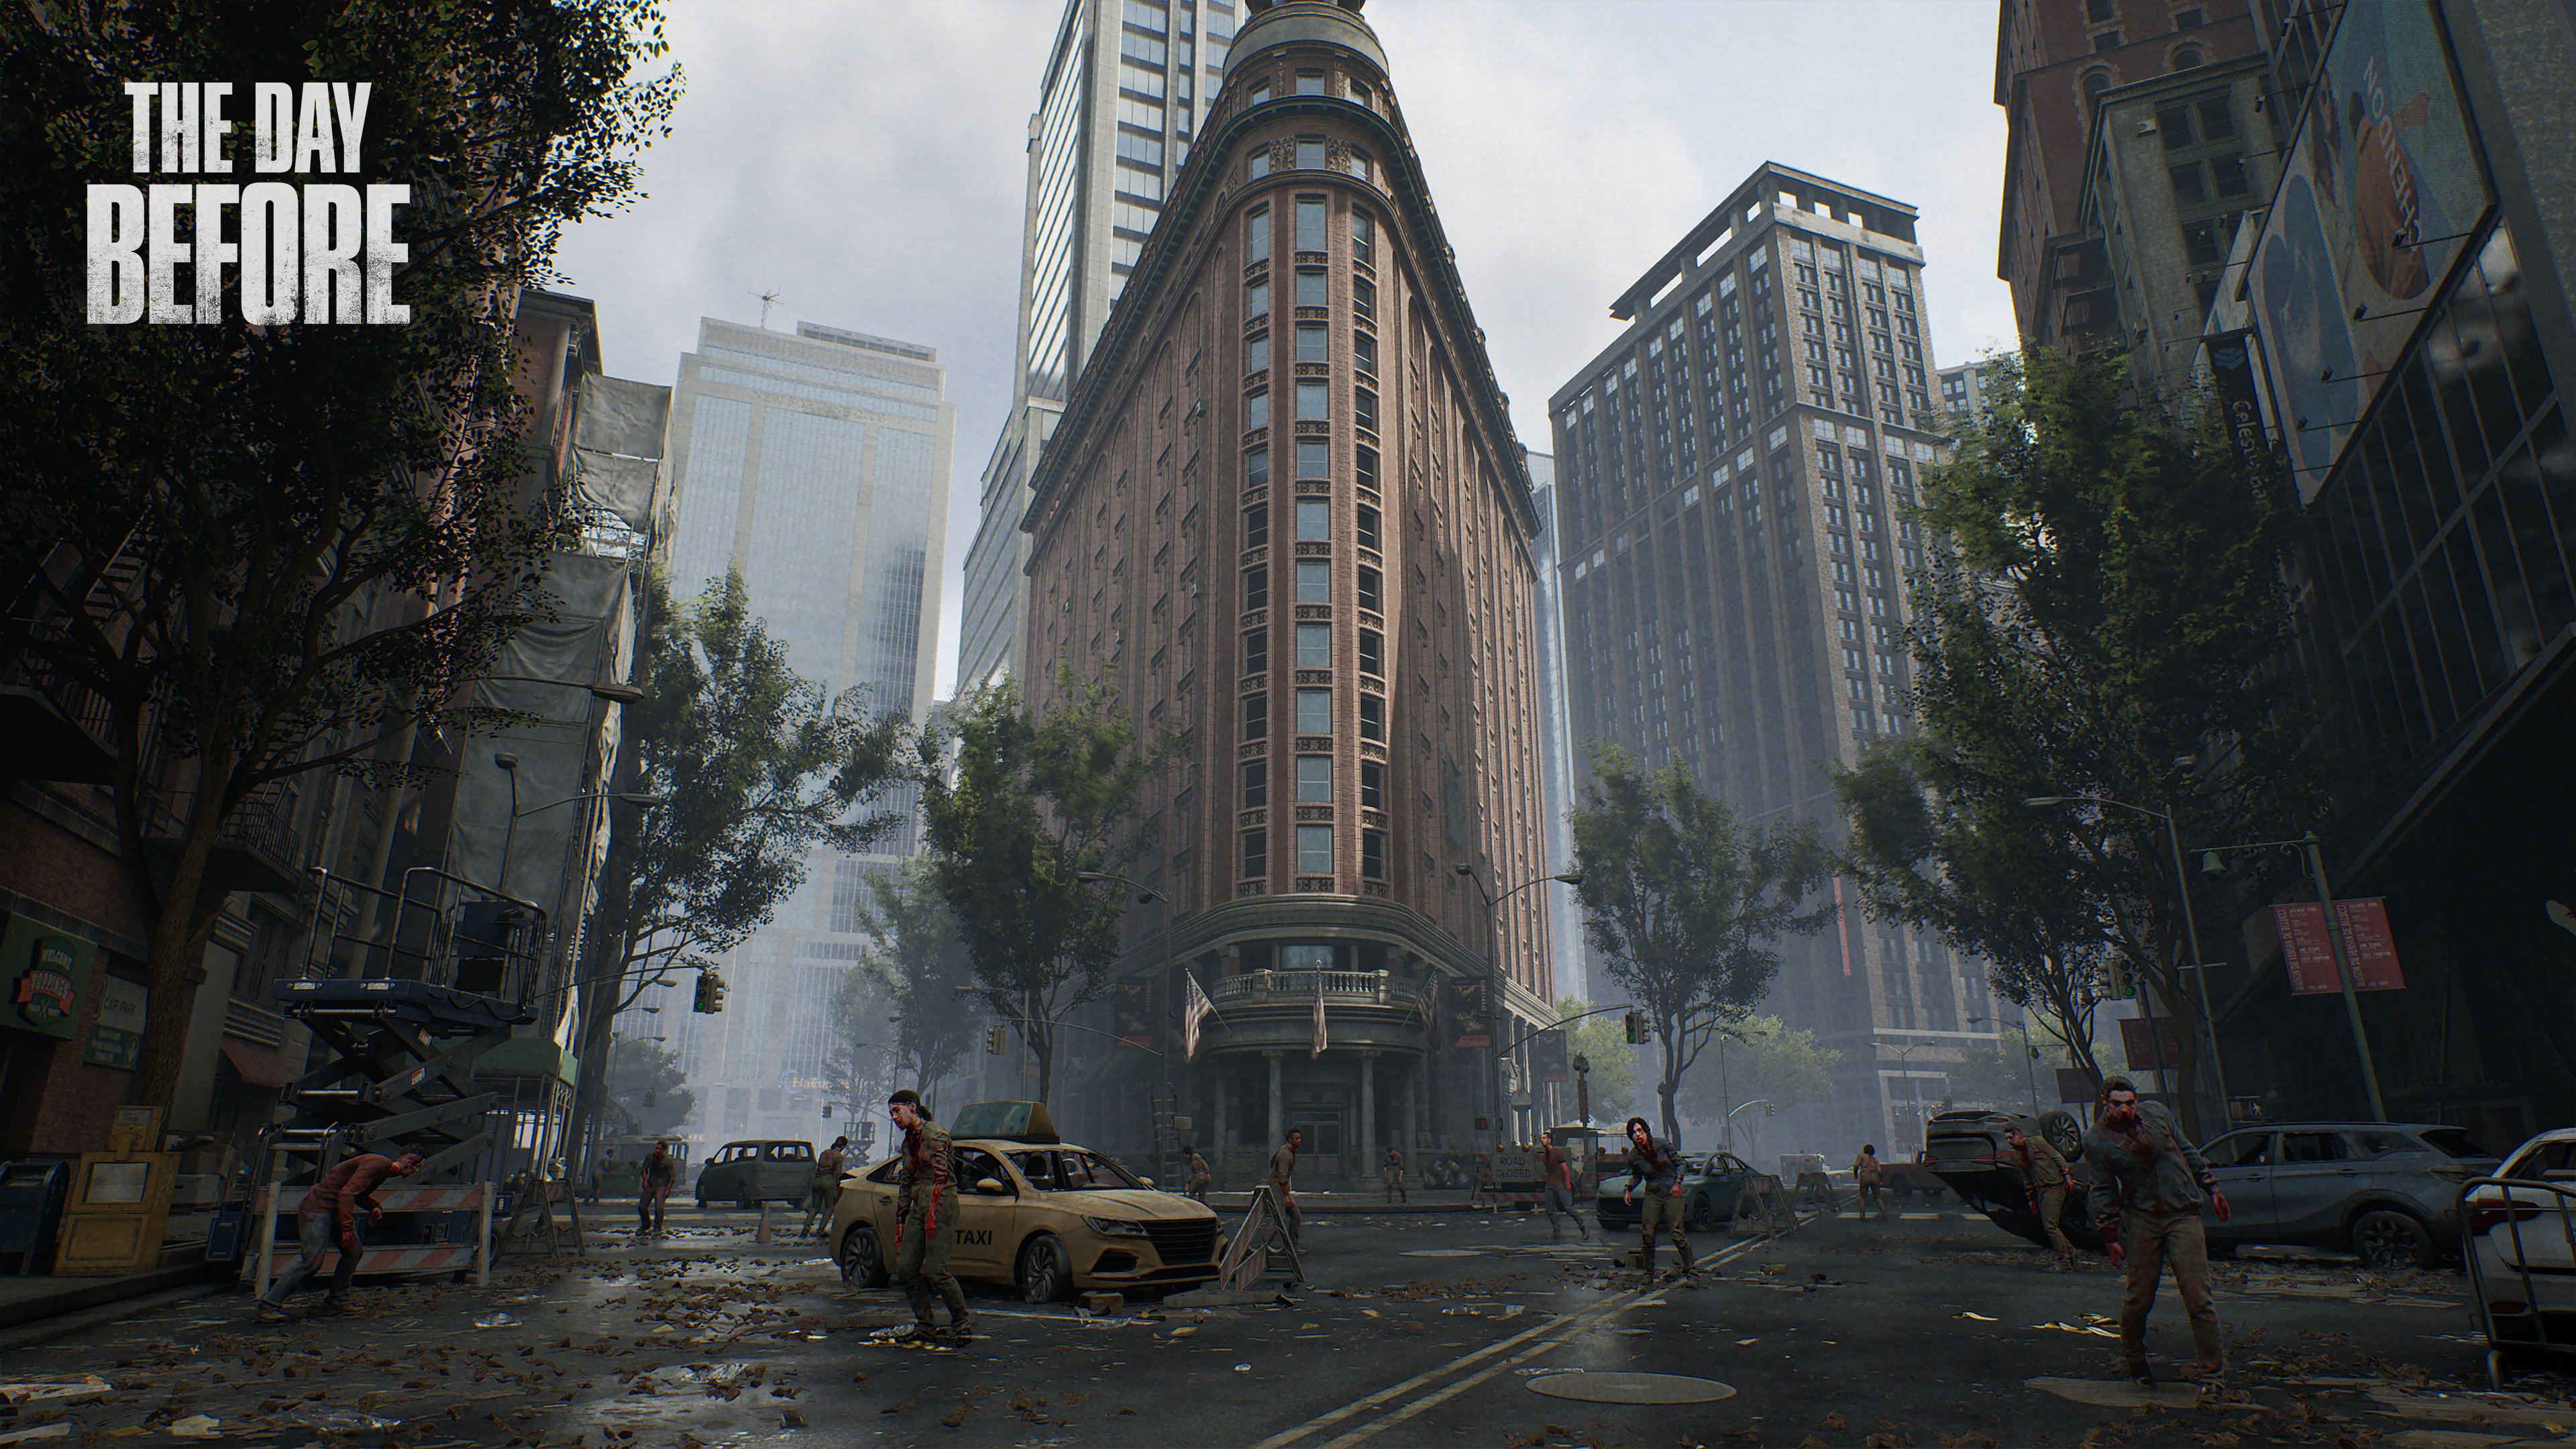 A screenshot from The Day Before, showing a post-apocalyptic setting with city streets filled with shambling zombies and abandoned cars